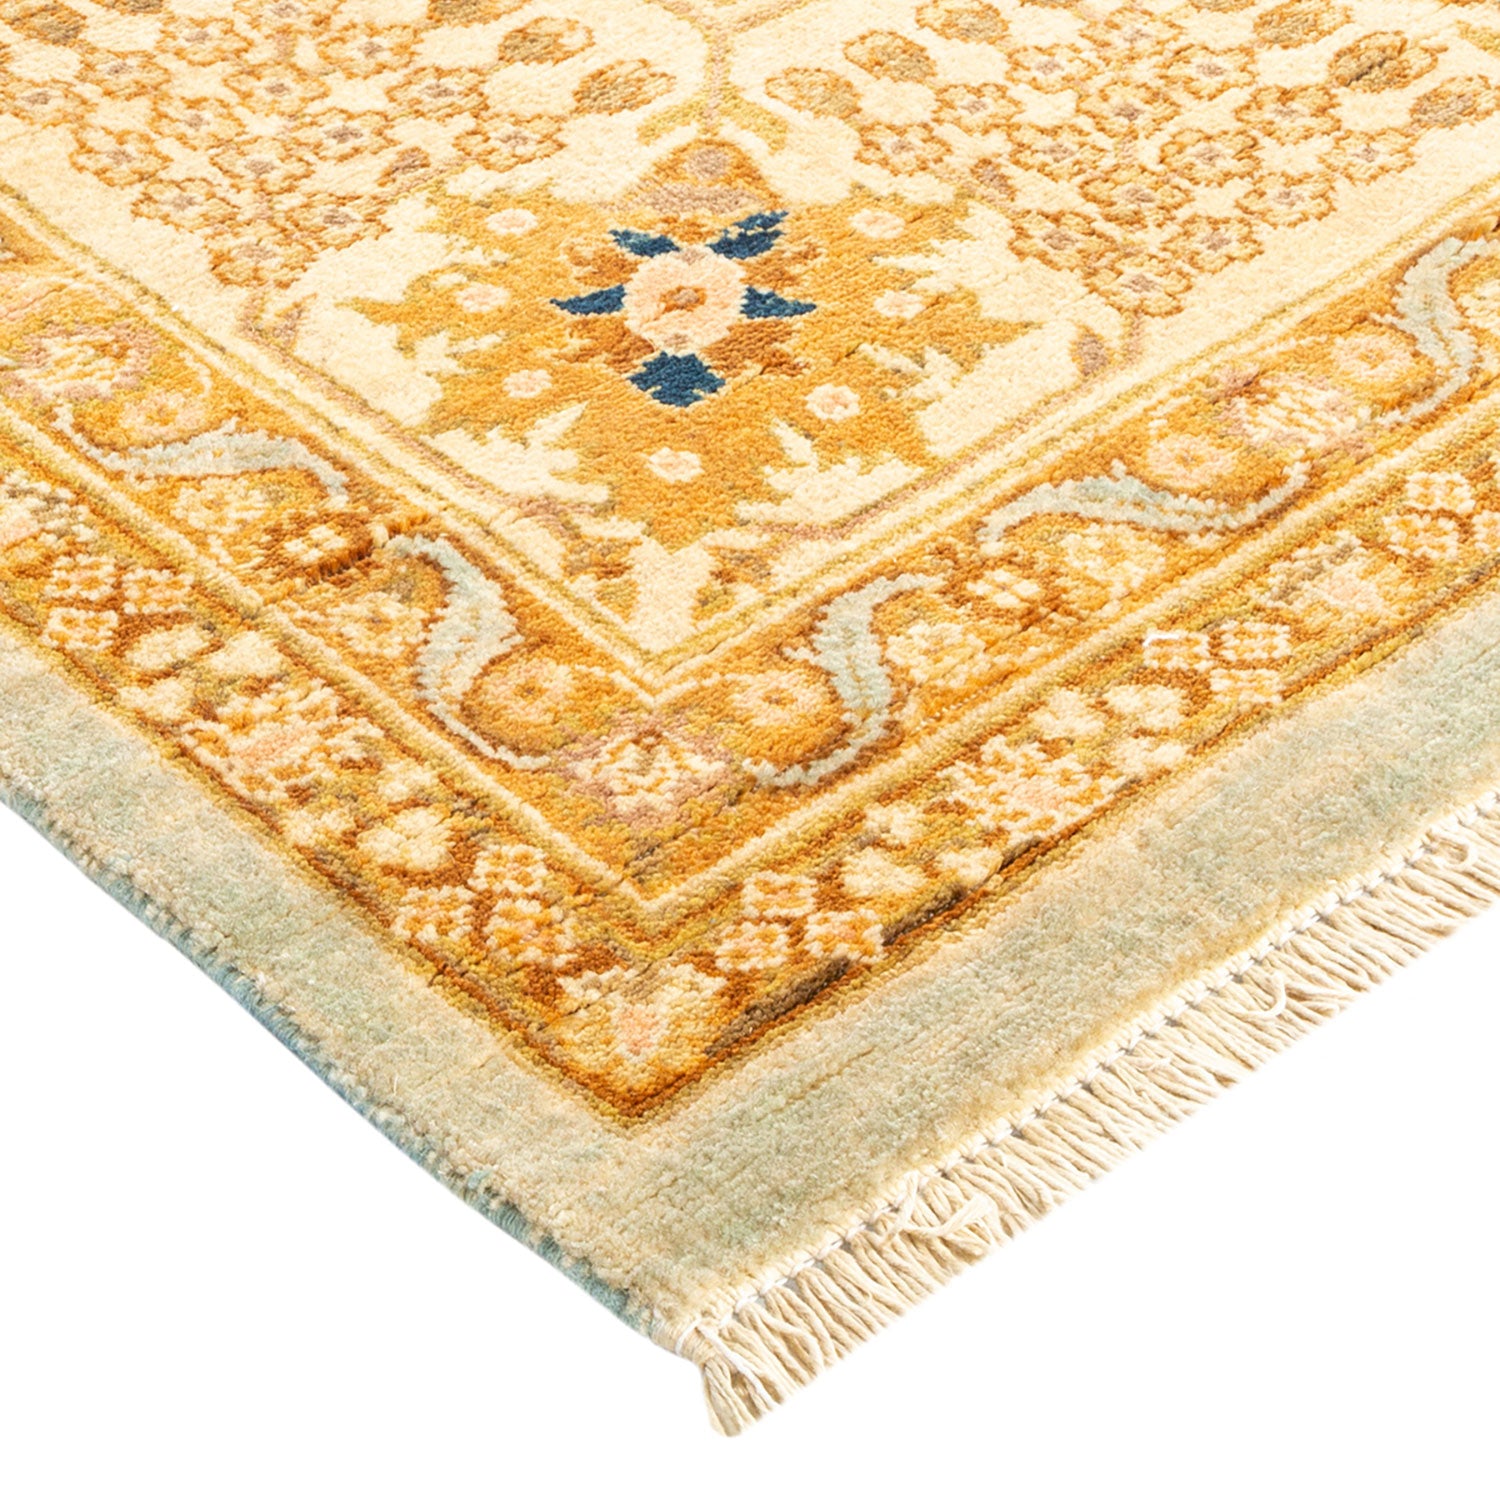 An intricately designed, warm-toned area rug with elegant scrollwork.